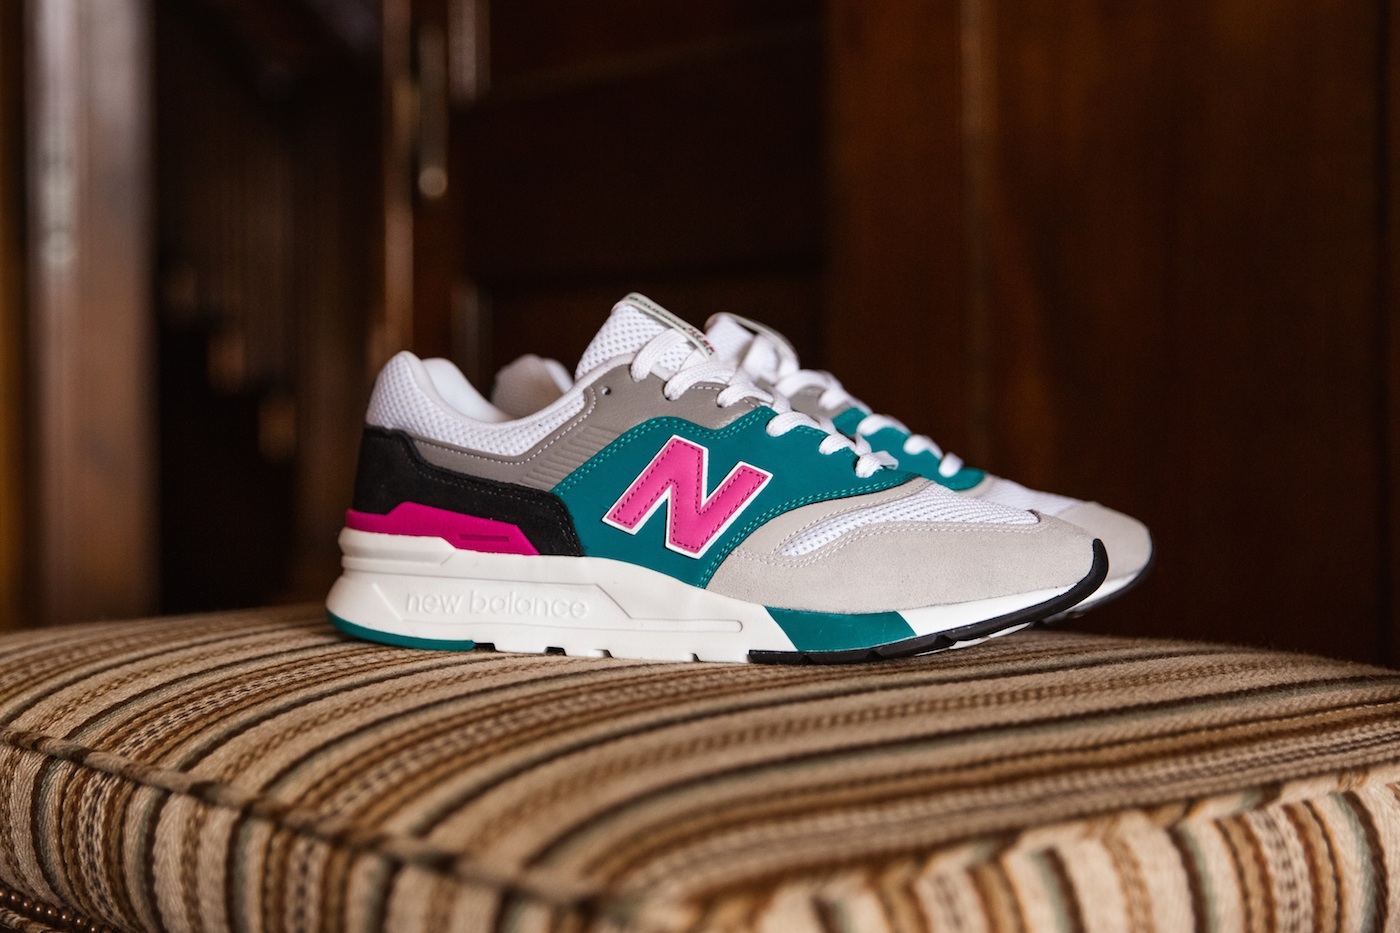 New Balance Introduces The Next Generation of 997